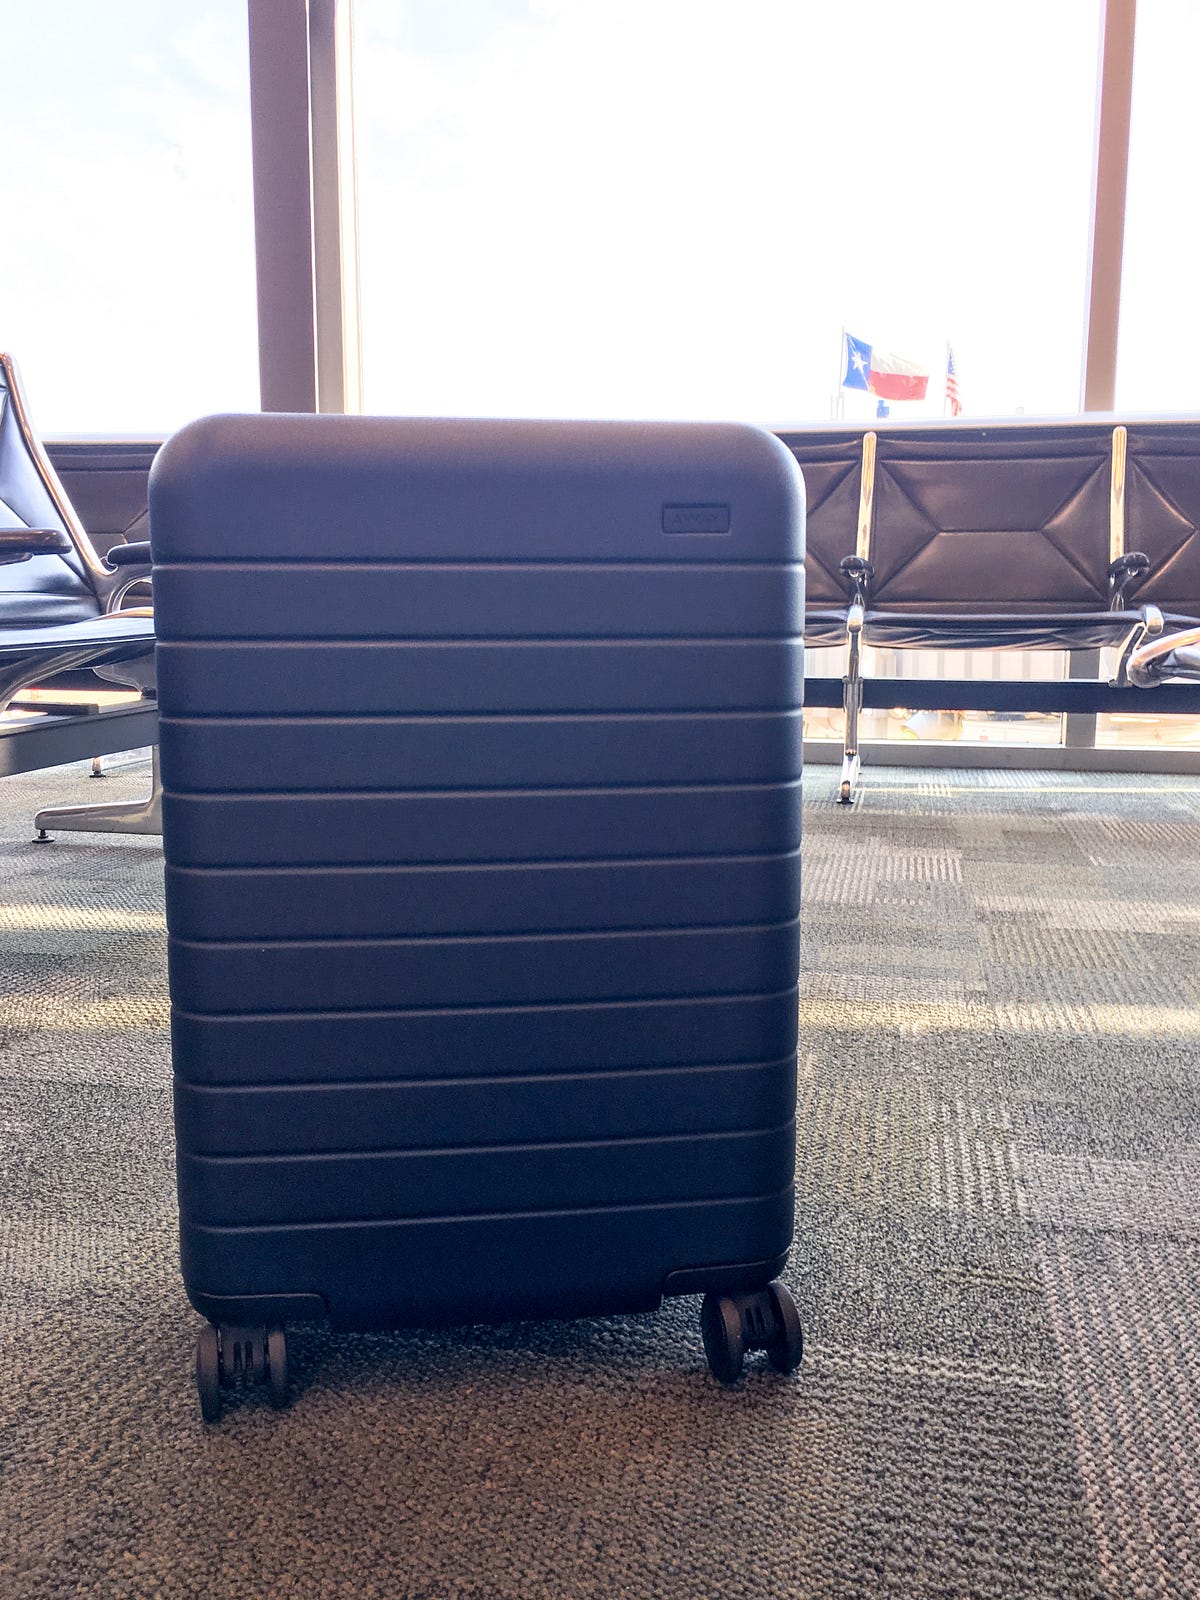 Reviewing Away's carry on bag. I recently came across a luggage…, by  Clement Ho